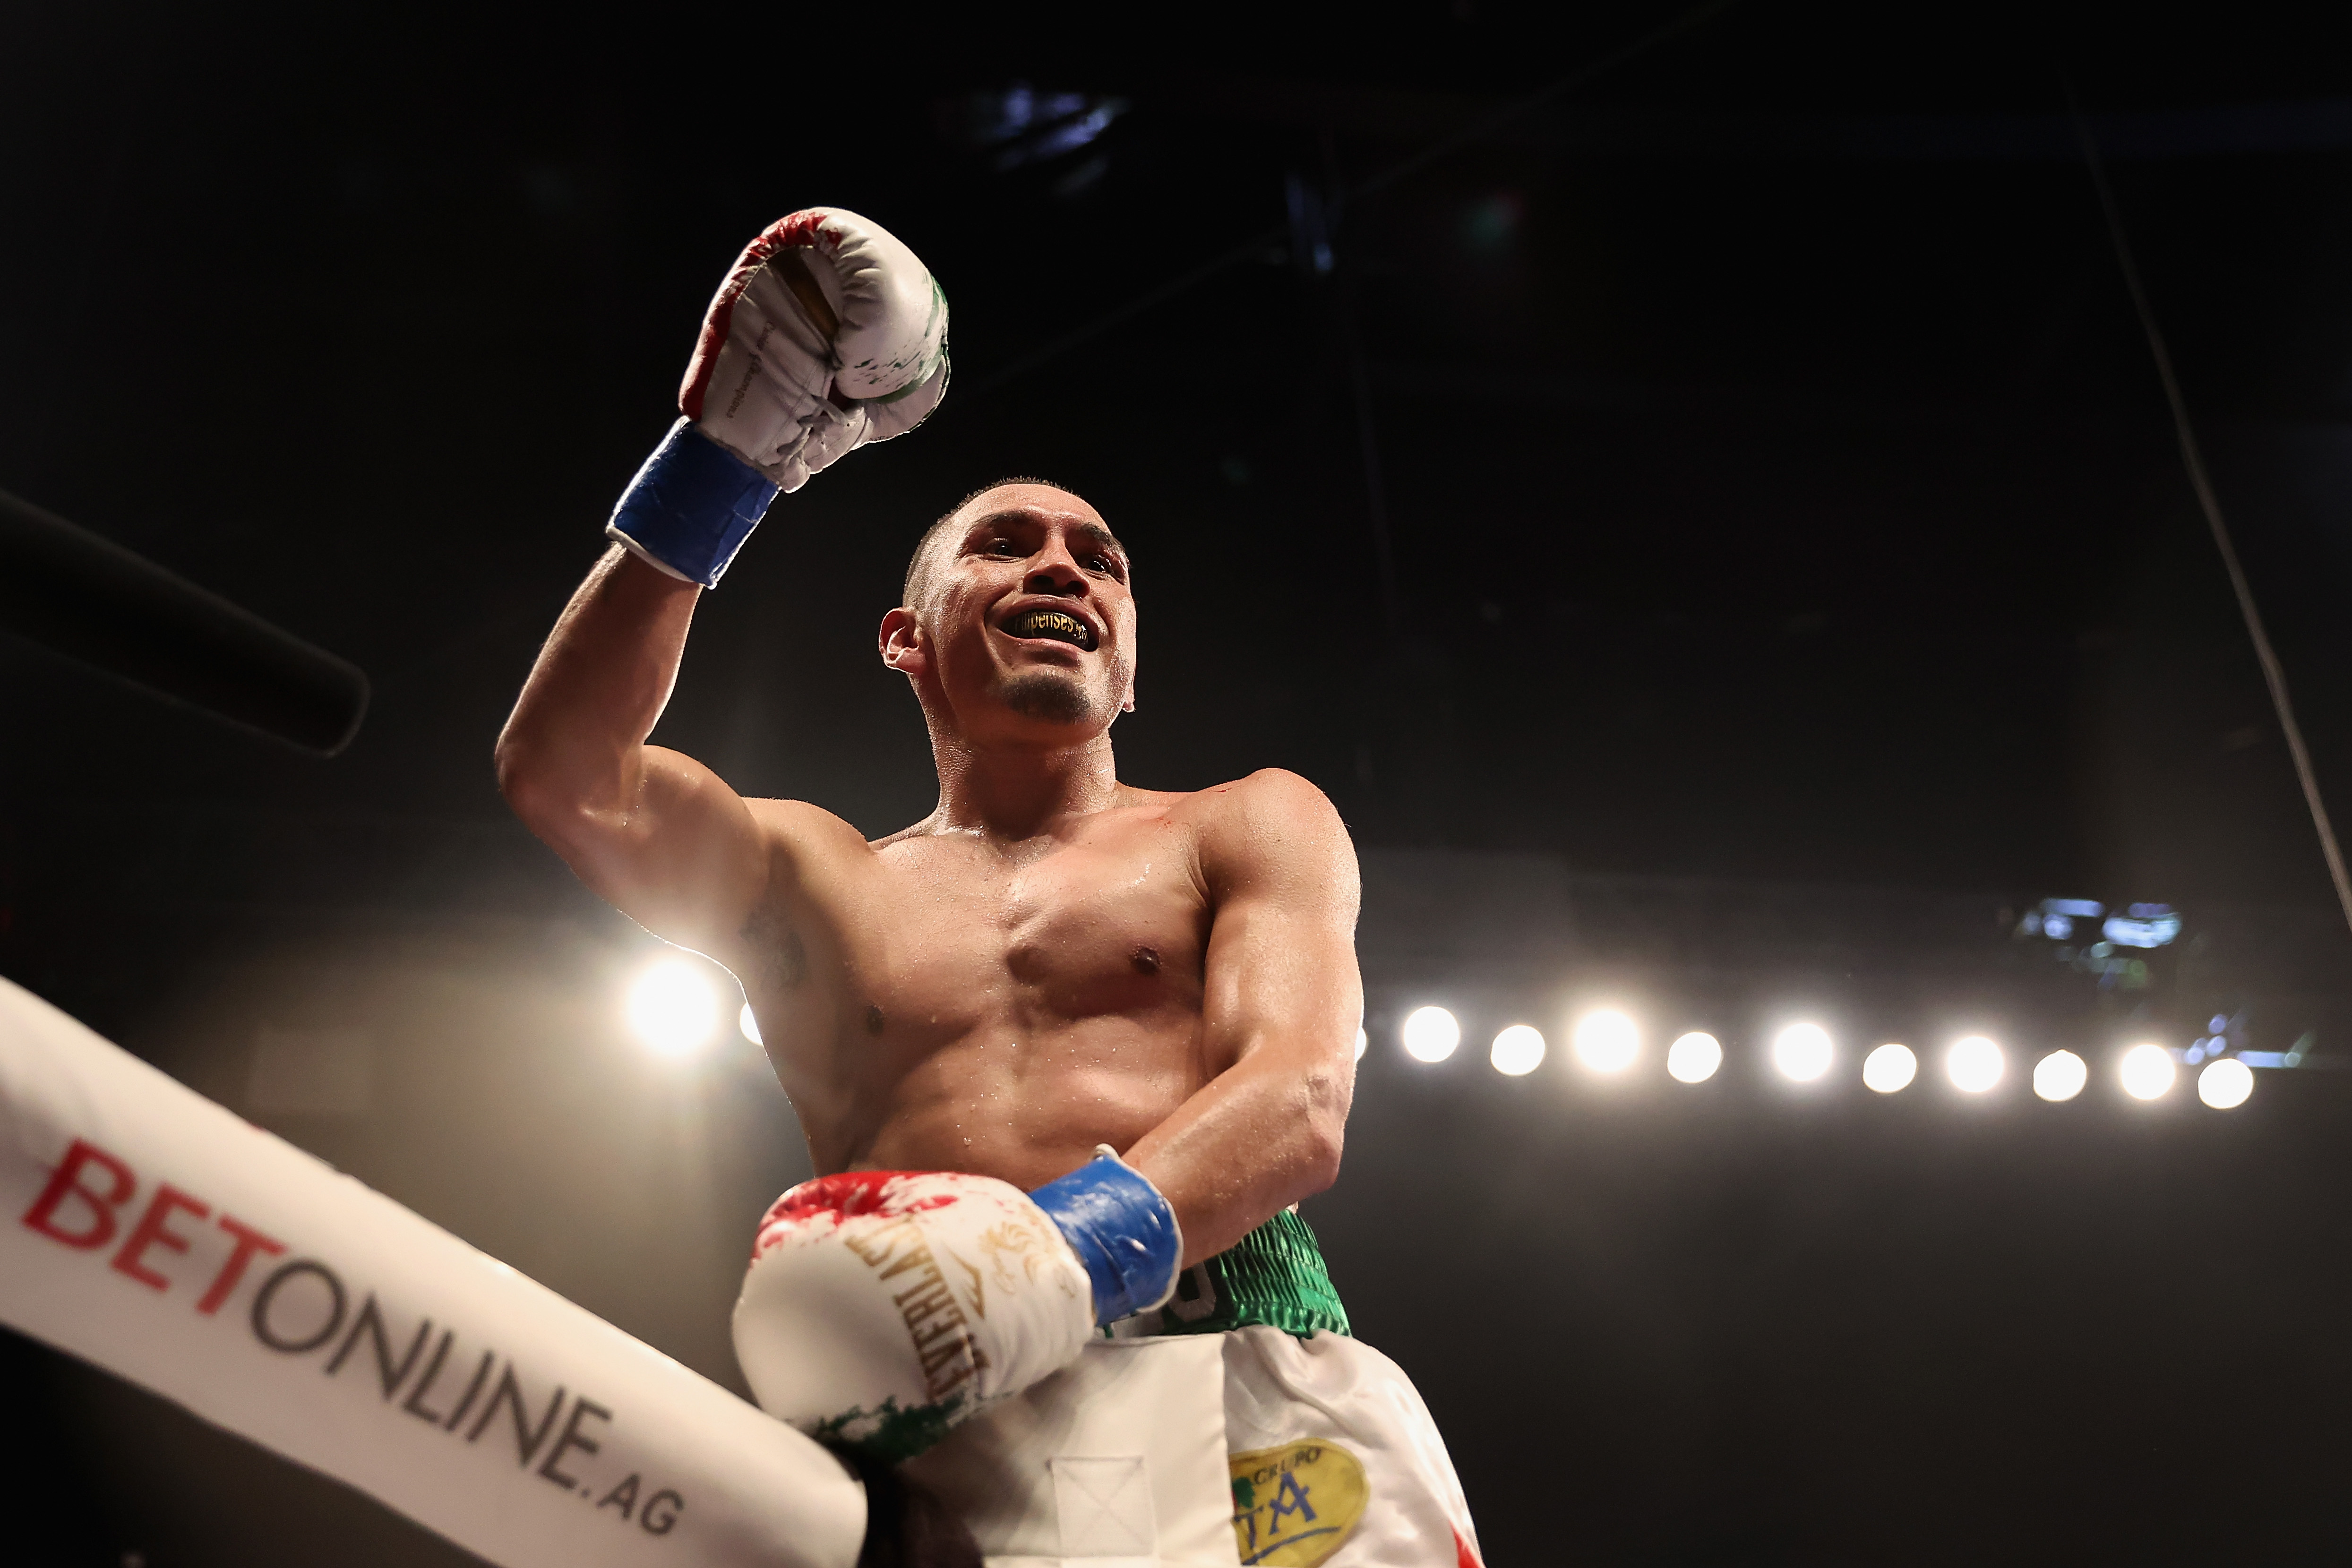 Juan Francisco Estrada once again staked his claim to the No. 1 spot at 115 lbs